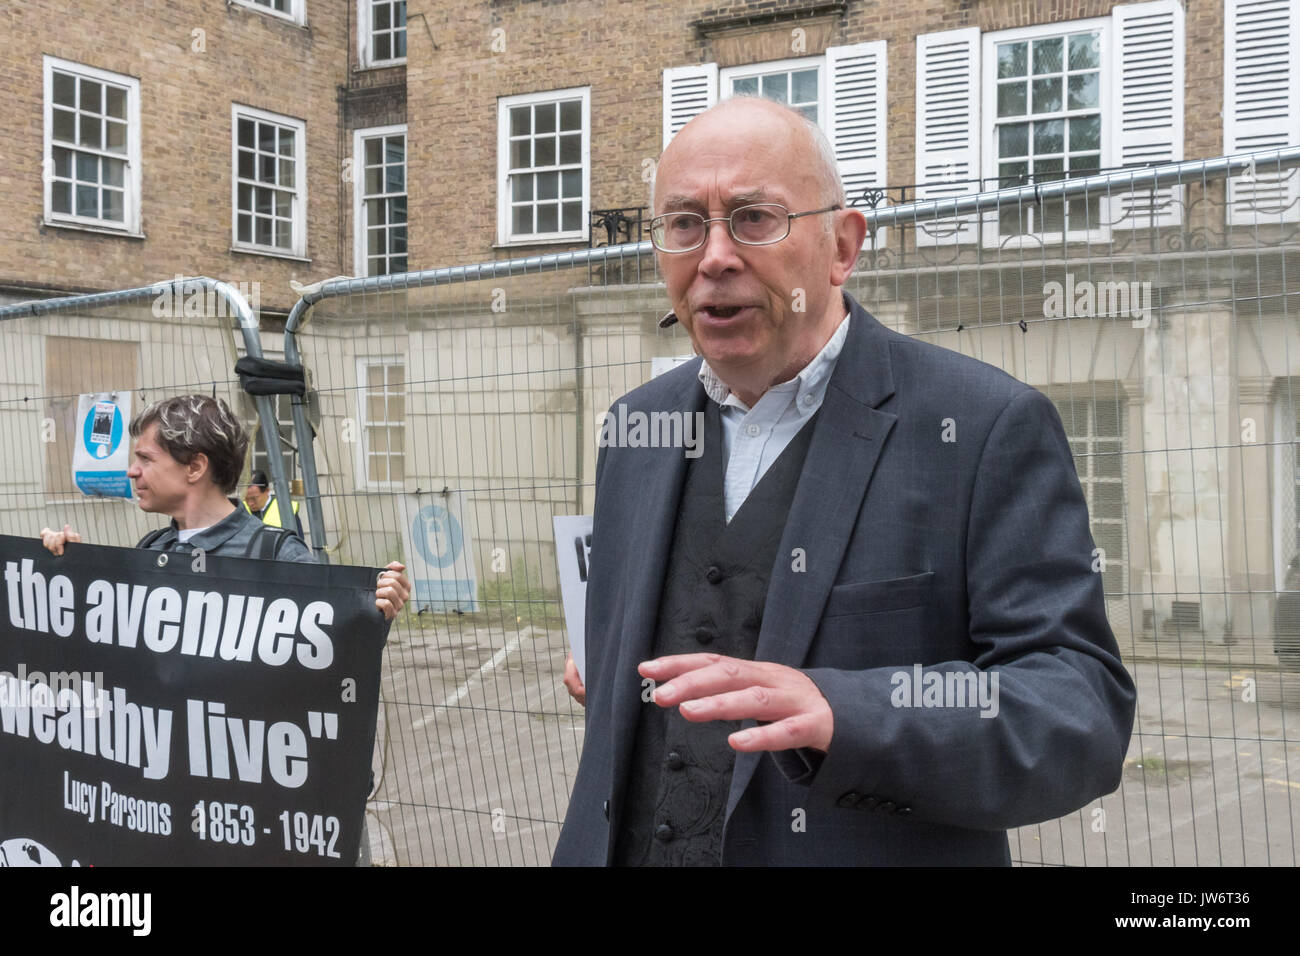 London, UK. 10th Aug, 2017. London, UK. 10th August 2017. Ian Bone of Class War, who lived in Grenfell Tower for three years in the 1980s, speaks at the protest by the Peoples Republic Of North Kensington, an organisation supporting the former residents of Grenfell Tower, outside Duke's Lodge, a large block of flats in Holland Park calling on Kensington & Chelsea Council to compulsory purchase the empty block and refurbish its 27 flats as housing for families displaced by the Grenfell fire, around a 15 minute walk away. The protest was supported by some local residents from Grenfell and by Stock Photo